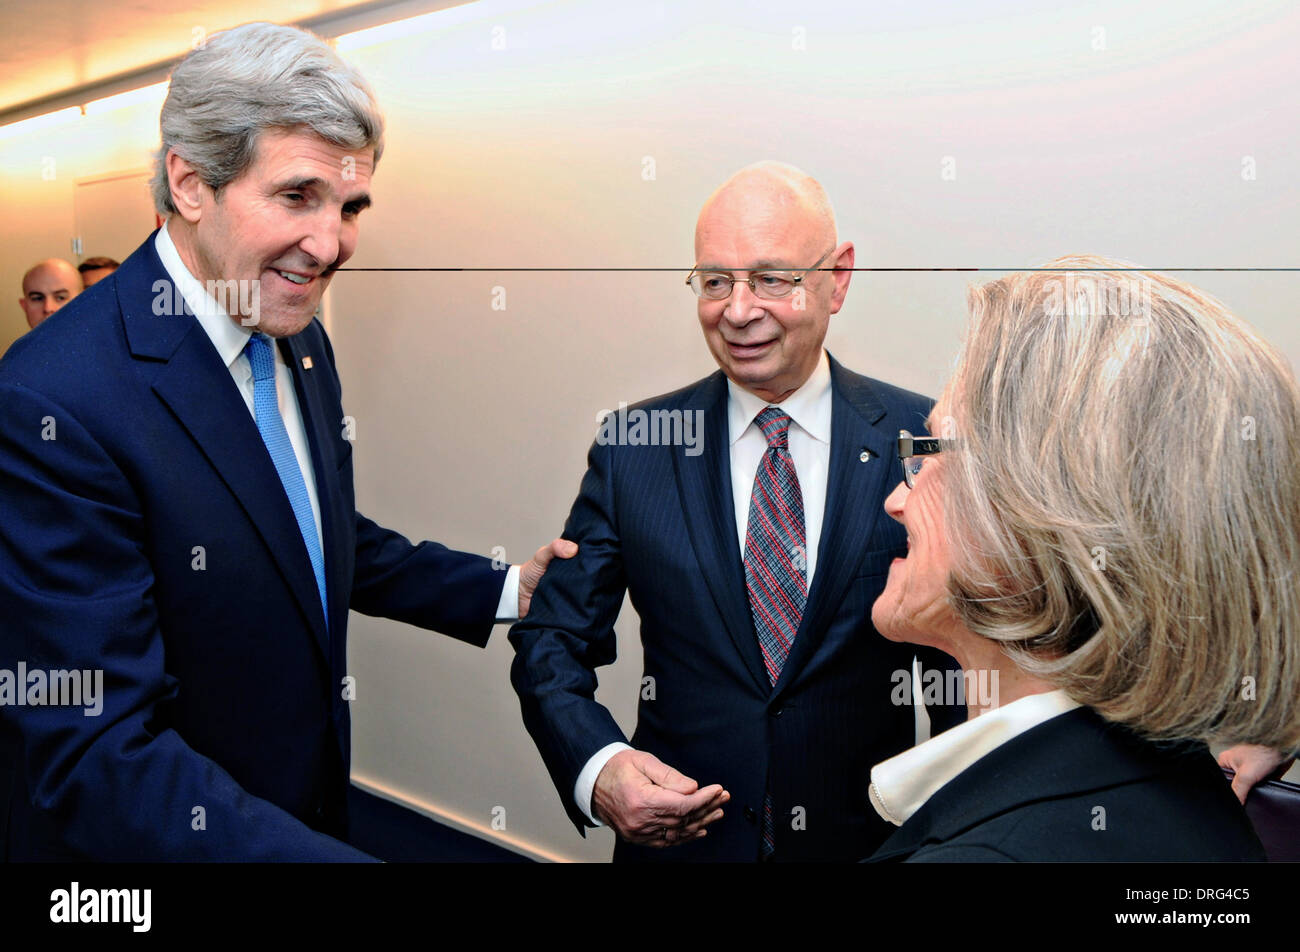 US Secretary of State John Kerry is greeted by Klaus and Hilde Schaub, the co-hosts of the World Economic Forum, before delivering the keynote address at the annual gathering January 24, 2014 in Davos, Switzerland. Stock Photo